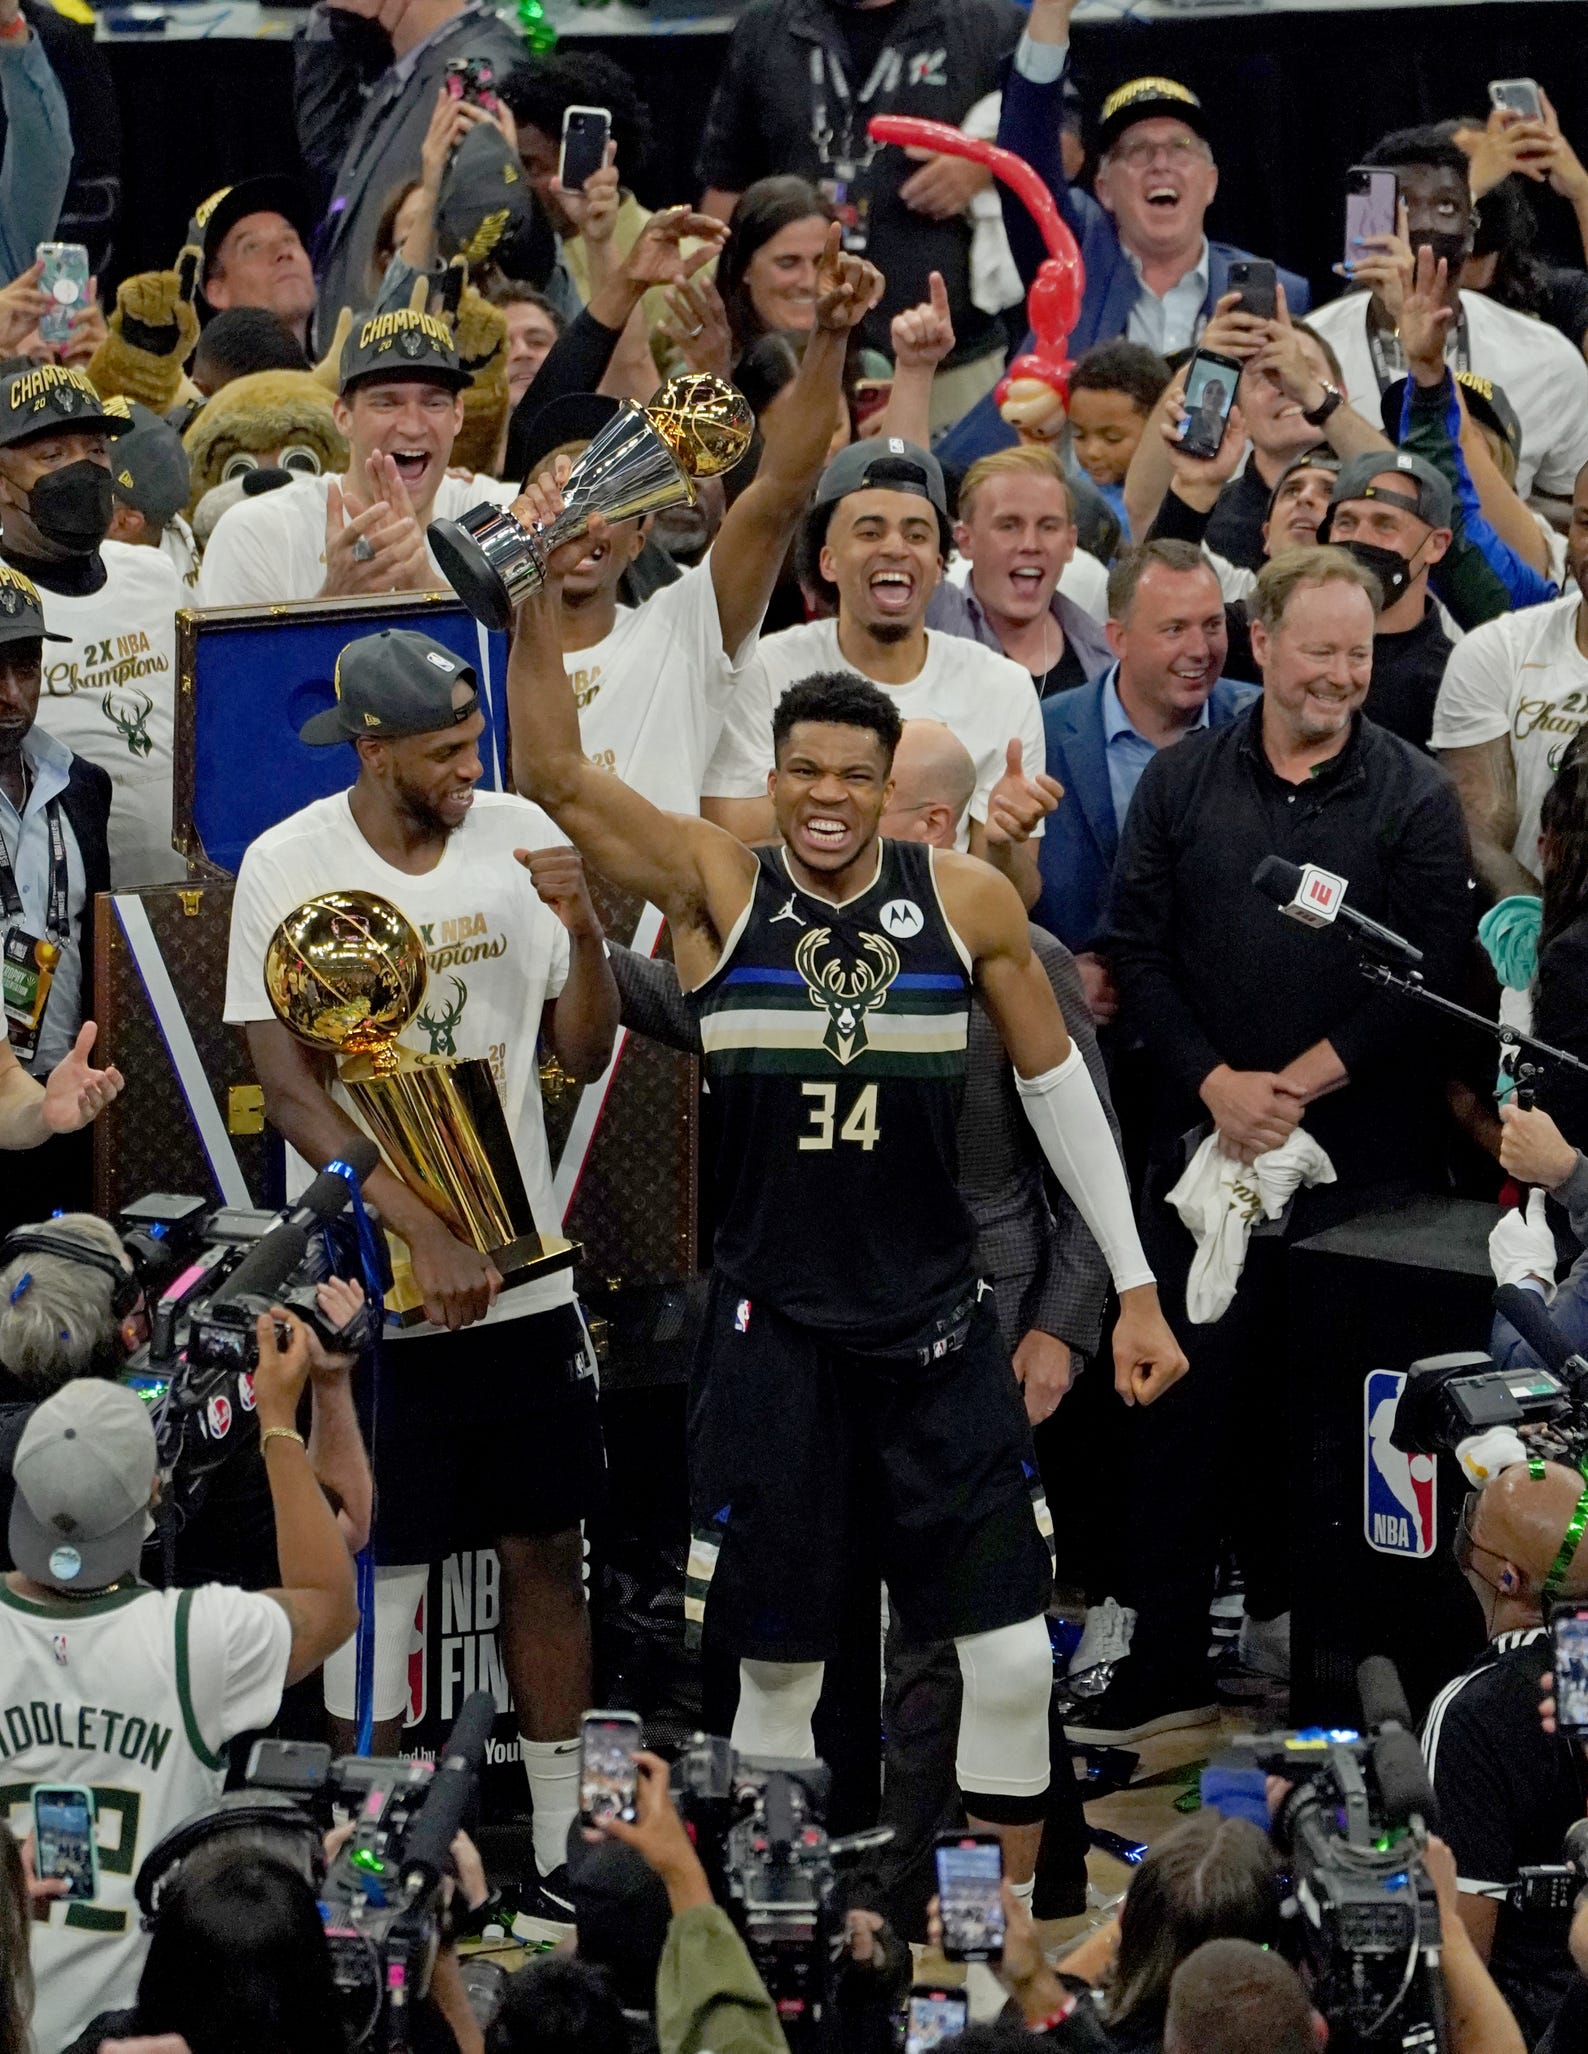 Milwaukee Bucks win! See photo from Game 6 of NBA Finals